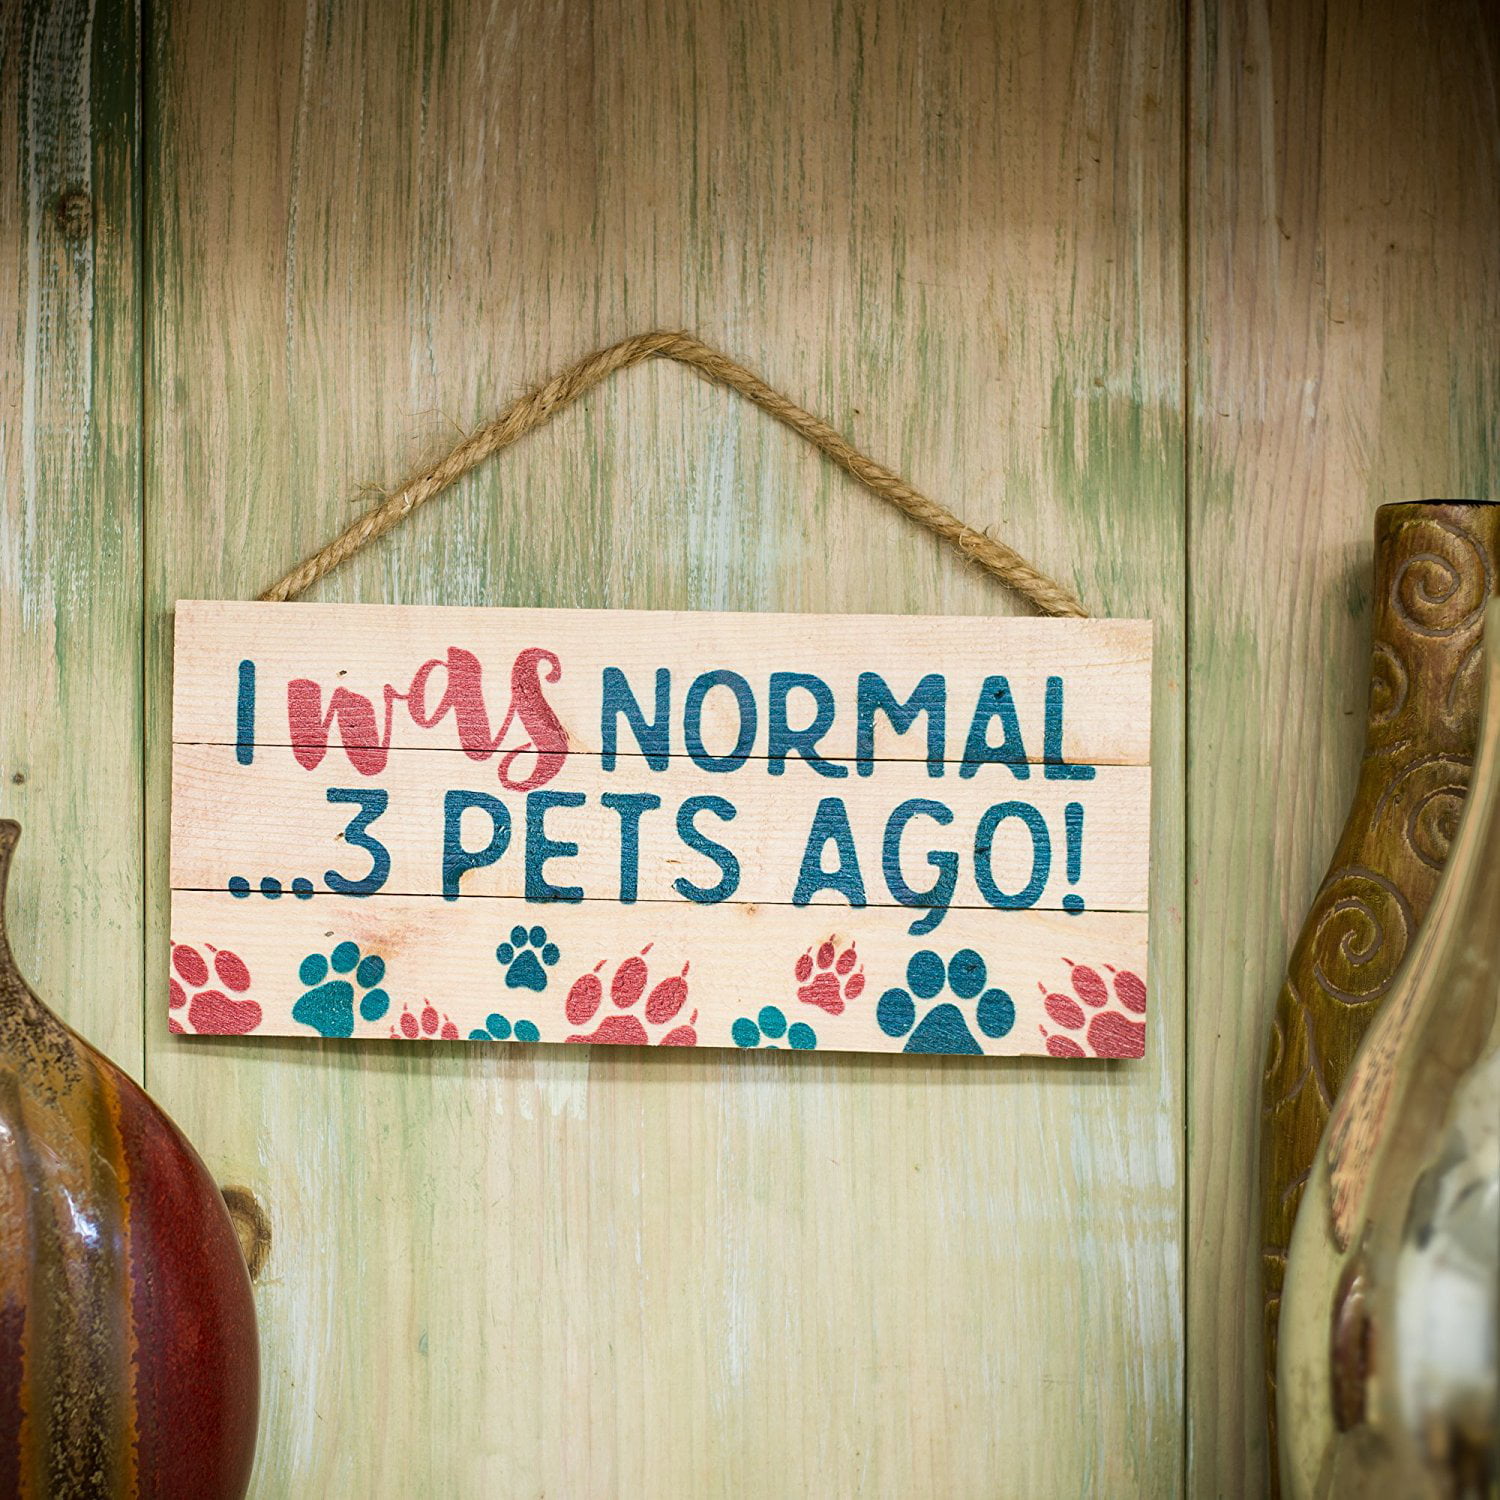 I was normal three kids ago wood hanging sign rustic home decore gift 